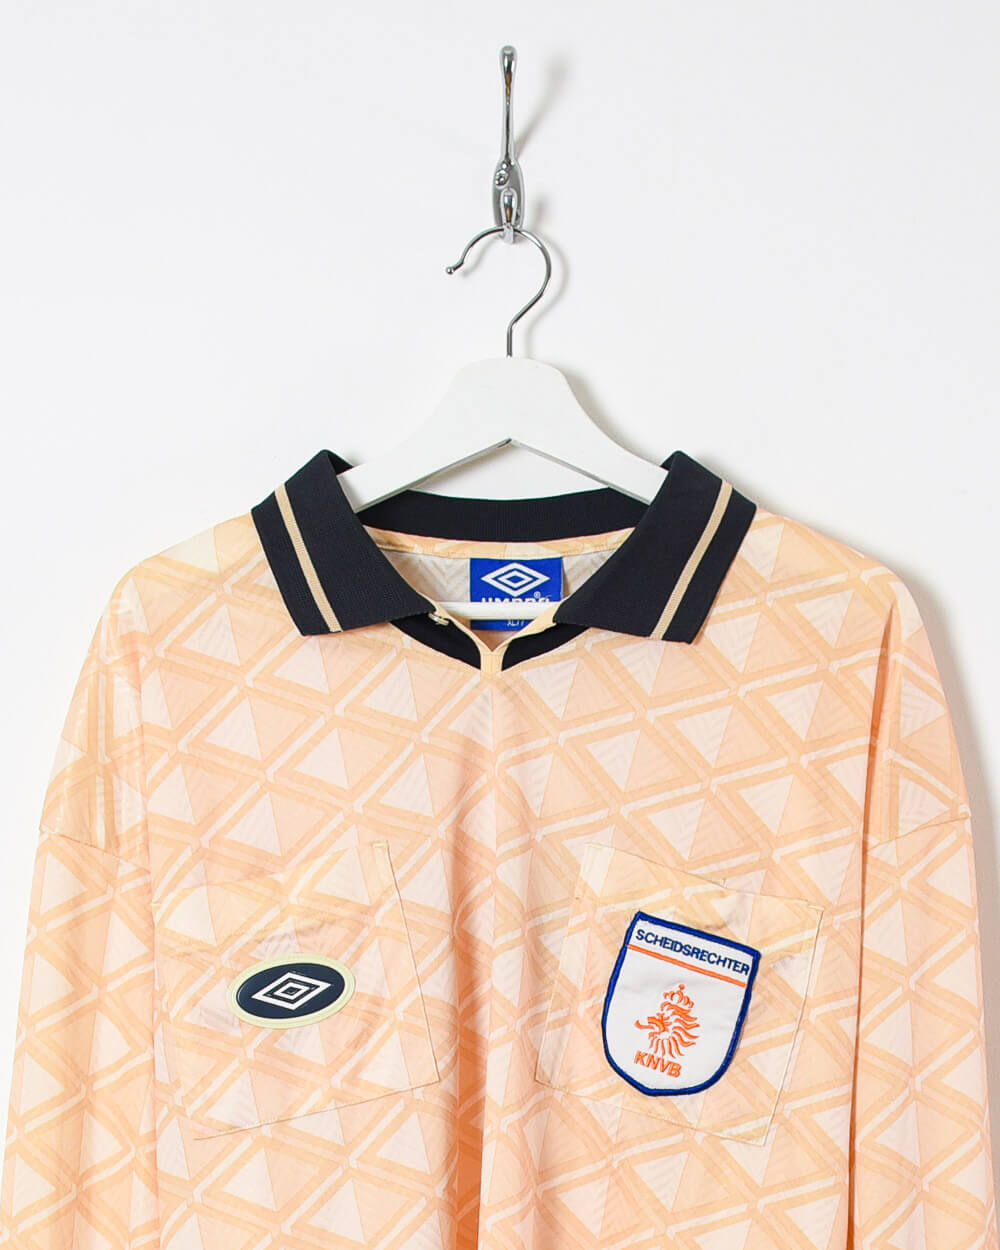 Umbro Netherlands Goalkeeper Top - X-Large - Domno Vintage 90s, 80s, 00s Retro and Vintage Clothing 